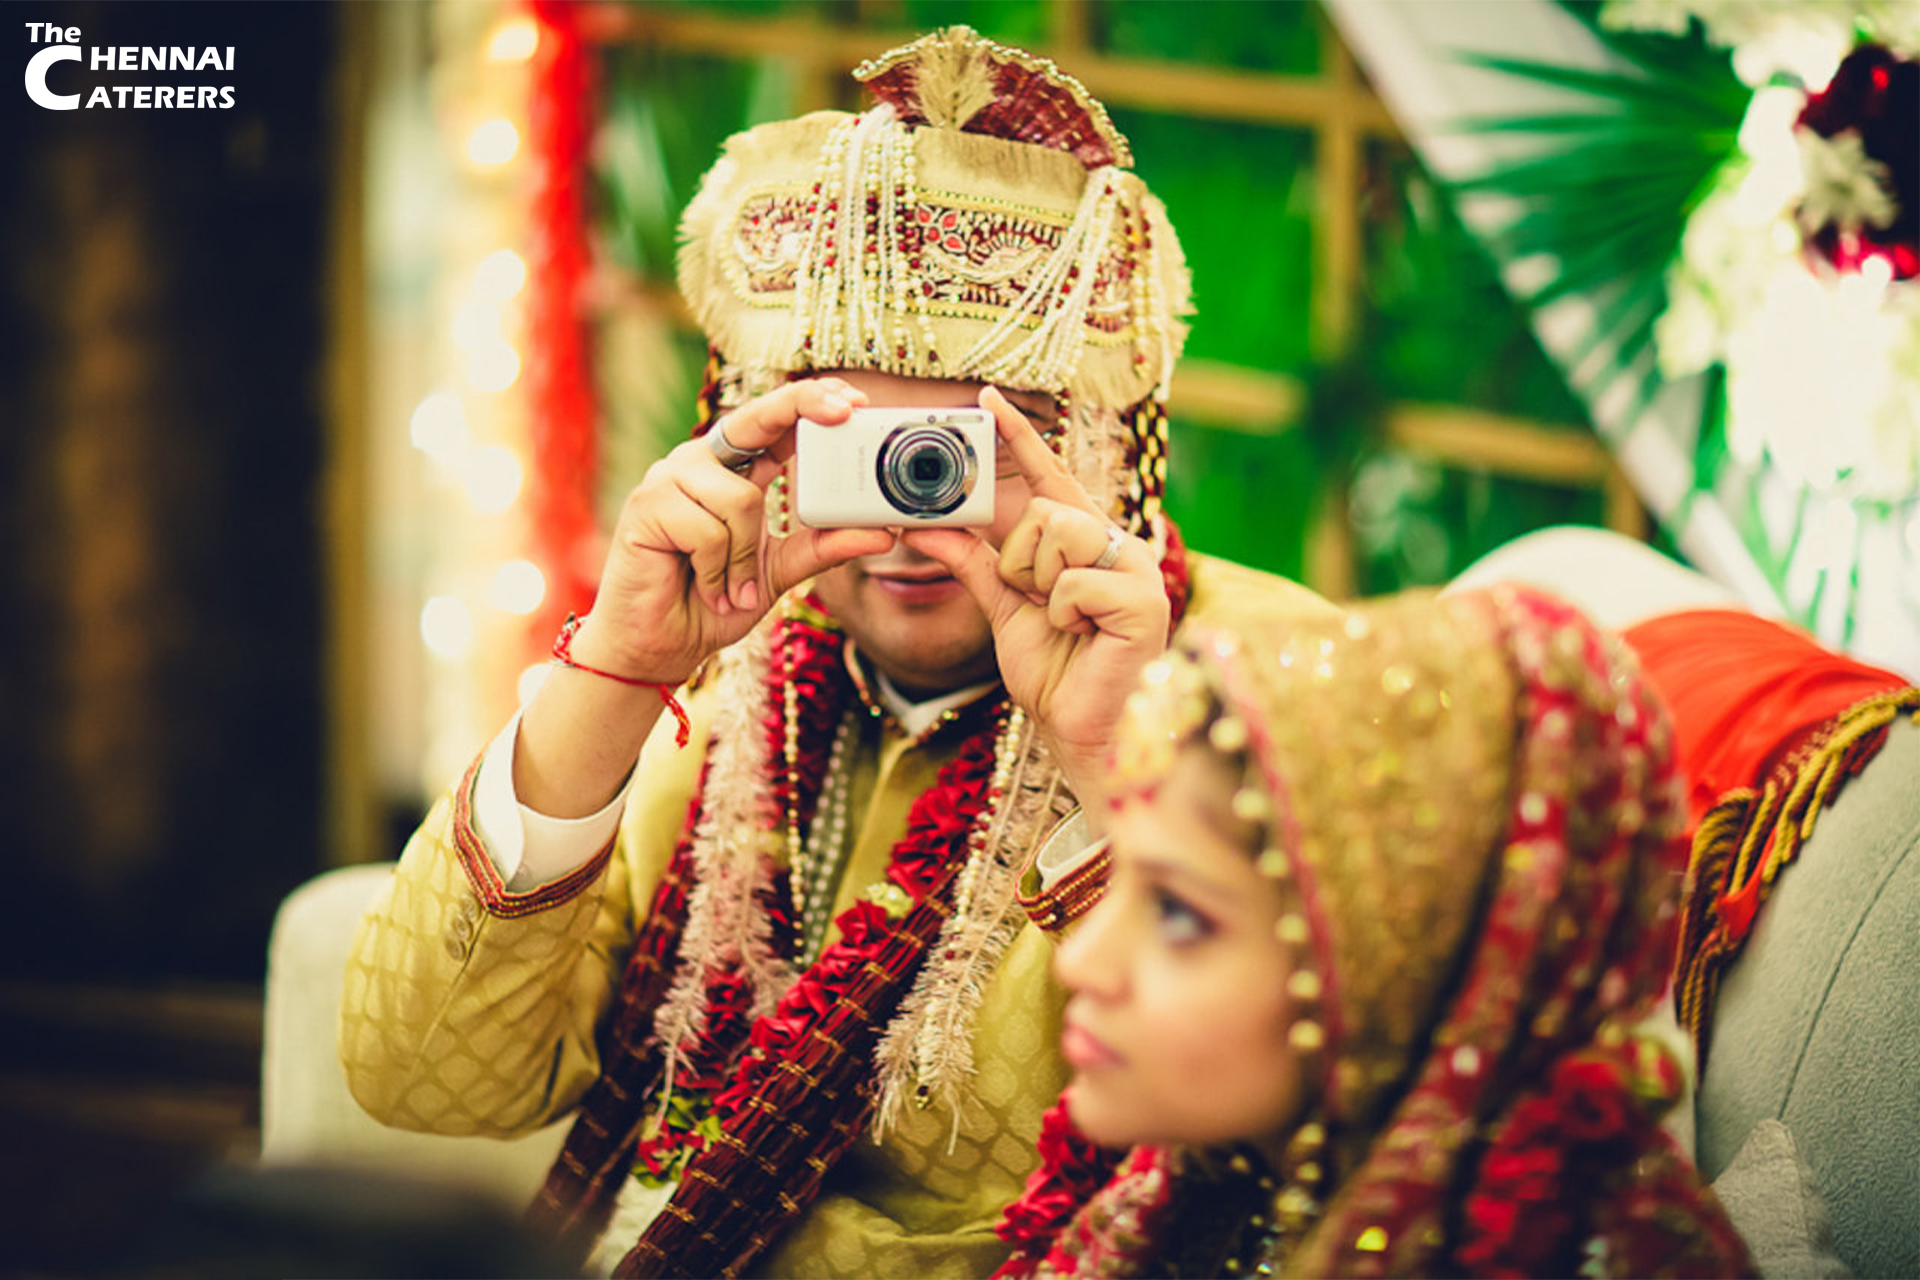 chennai Caterers Photography & Videography